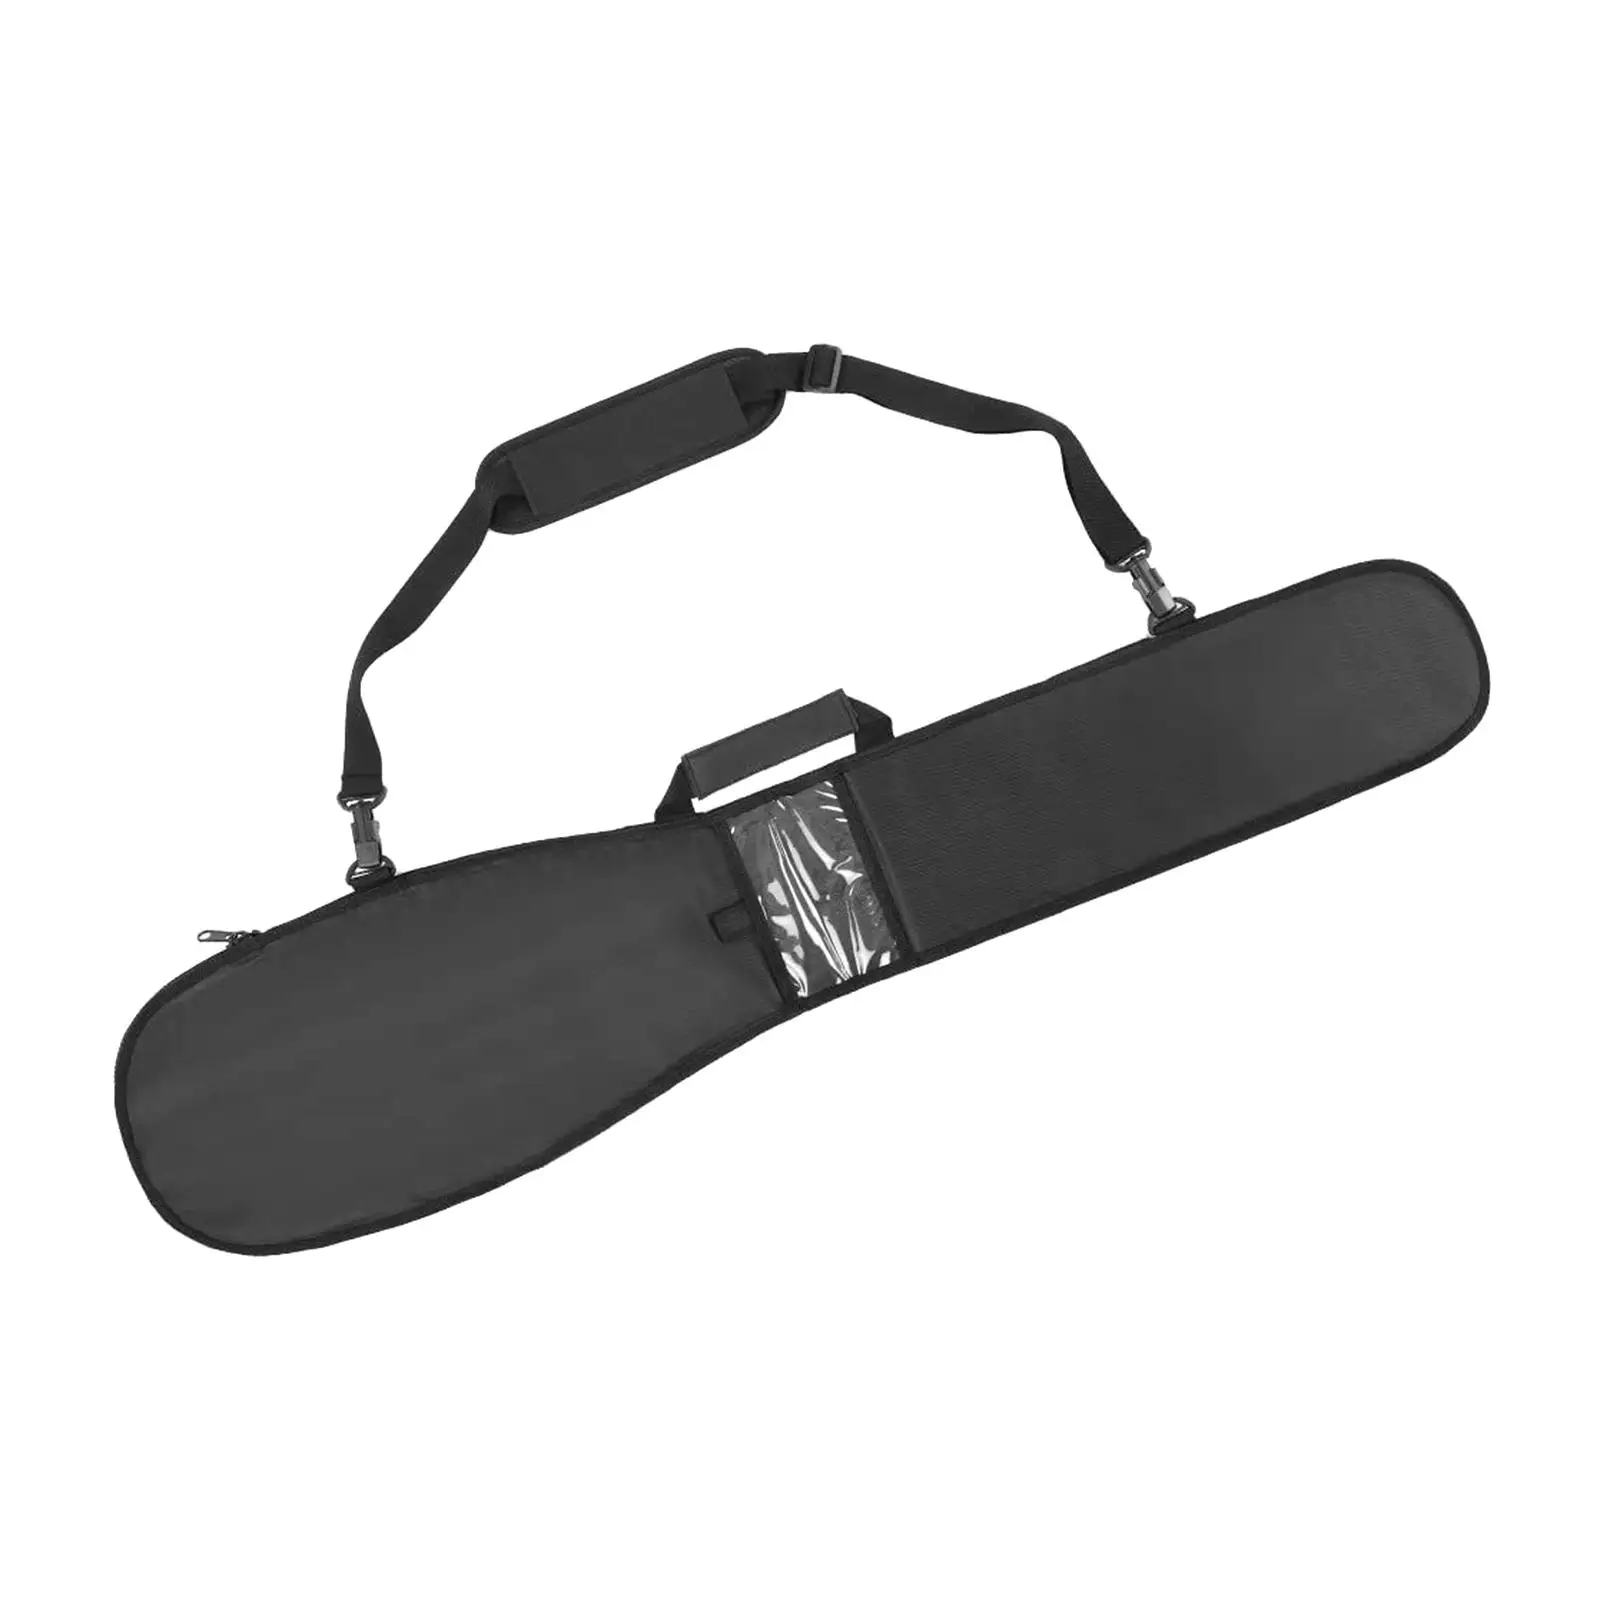 Portable Paddle Bag Protective Cloth Holder Split Shaft Paddle Cover Case Pouch Kayak Paddles Storage Bag for Canoeing Rafting